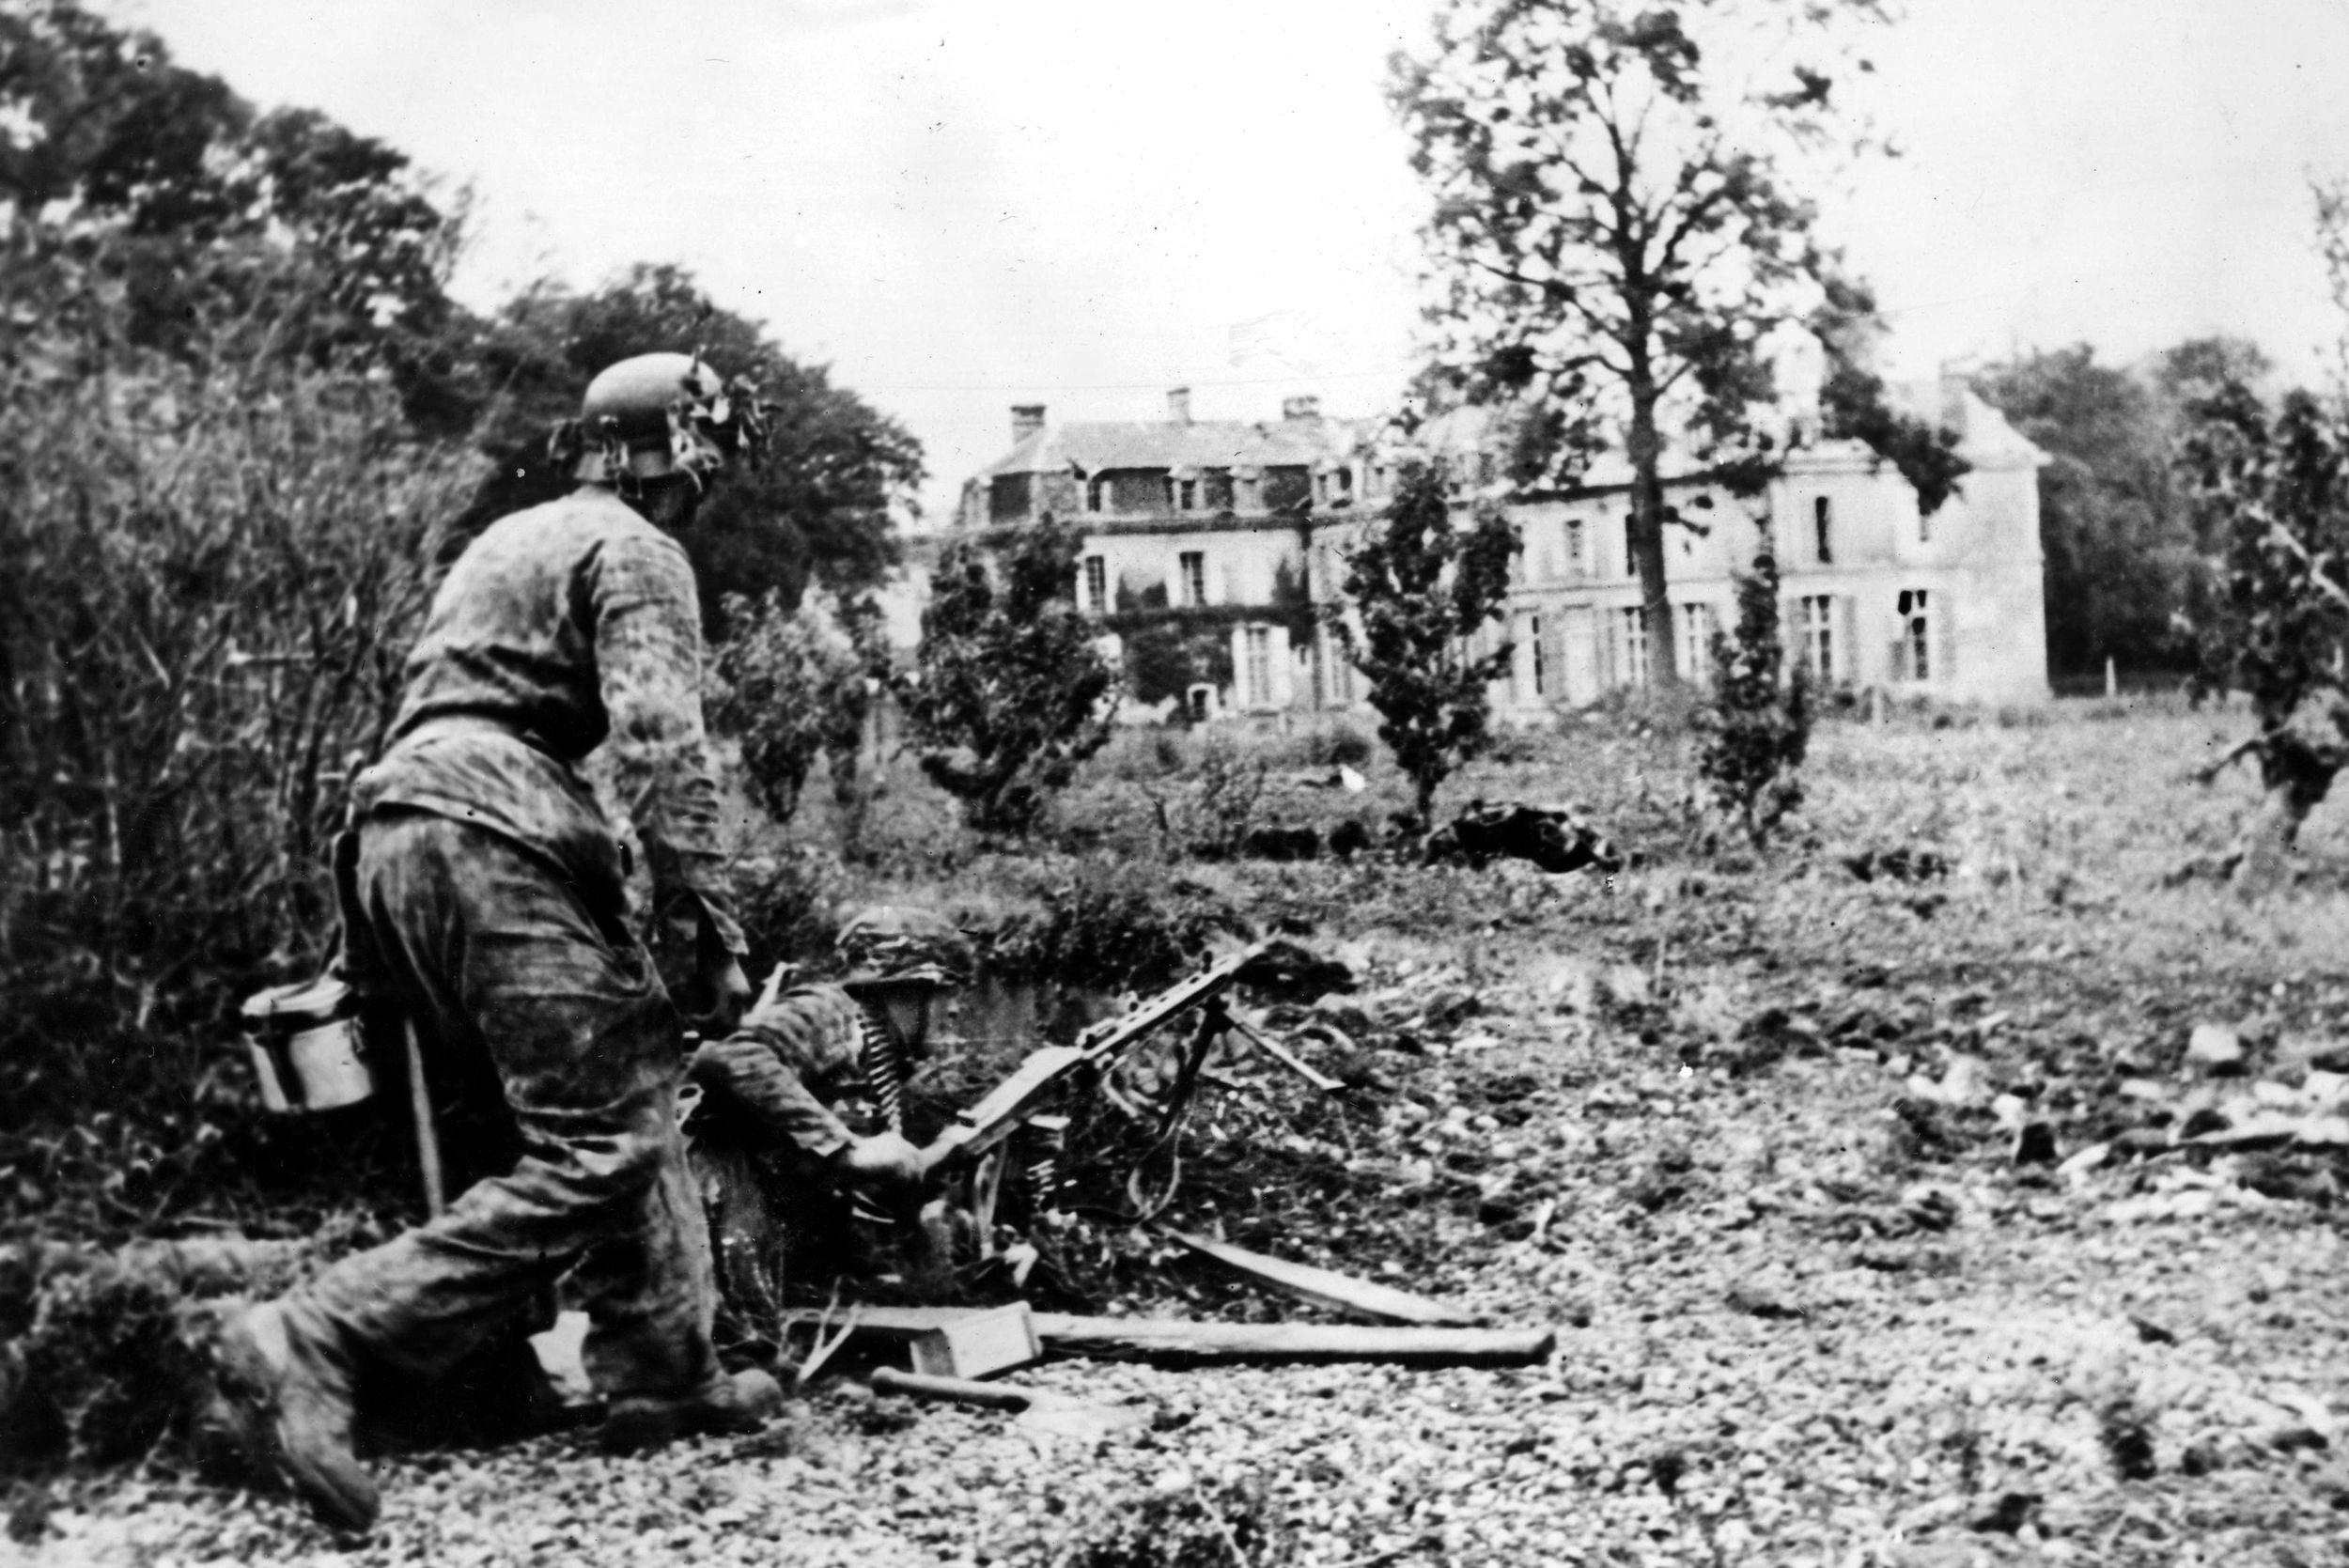 Two German grenadiers of the 12th SS Panzer Division Hitlerjugend man a defensive position in Normandy with an MG-42 machine gun. The 12th SS fought doggedly in the defense of Caen and during the German retreat from Normandy.